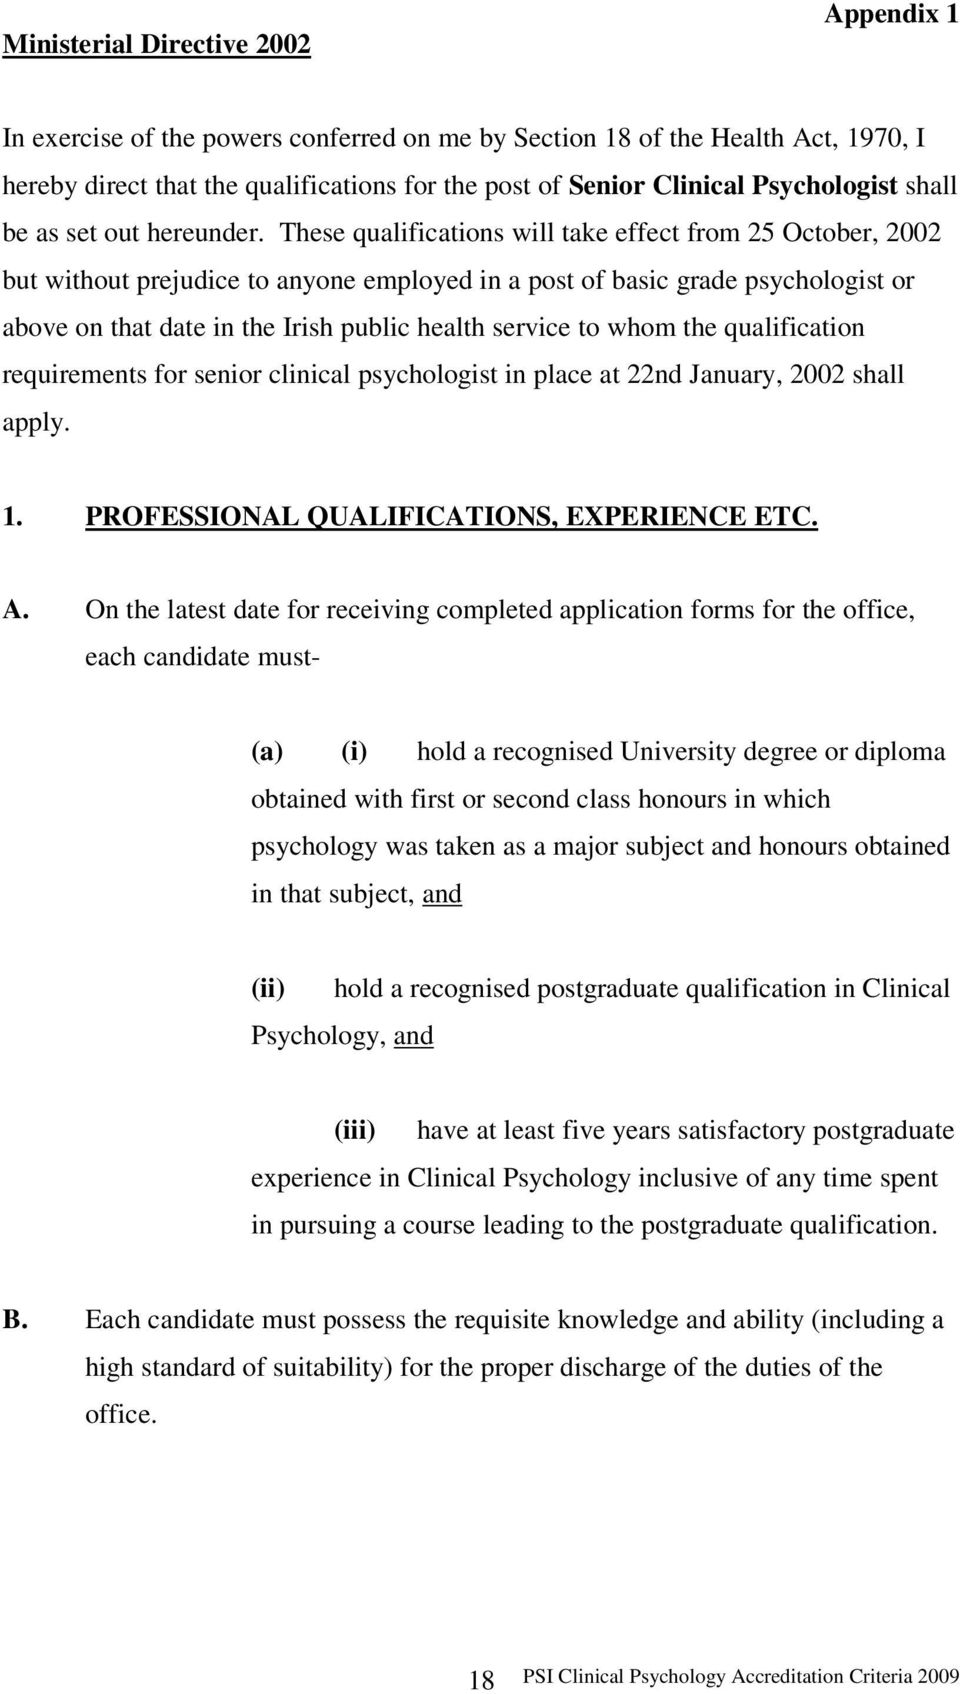 These qualifications will take effect from 25 October, 2002 but without prejudice to anyone employed in a post of basic grade psychologist or above on that date in the Irish public health service to